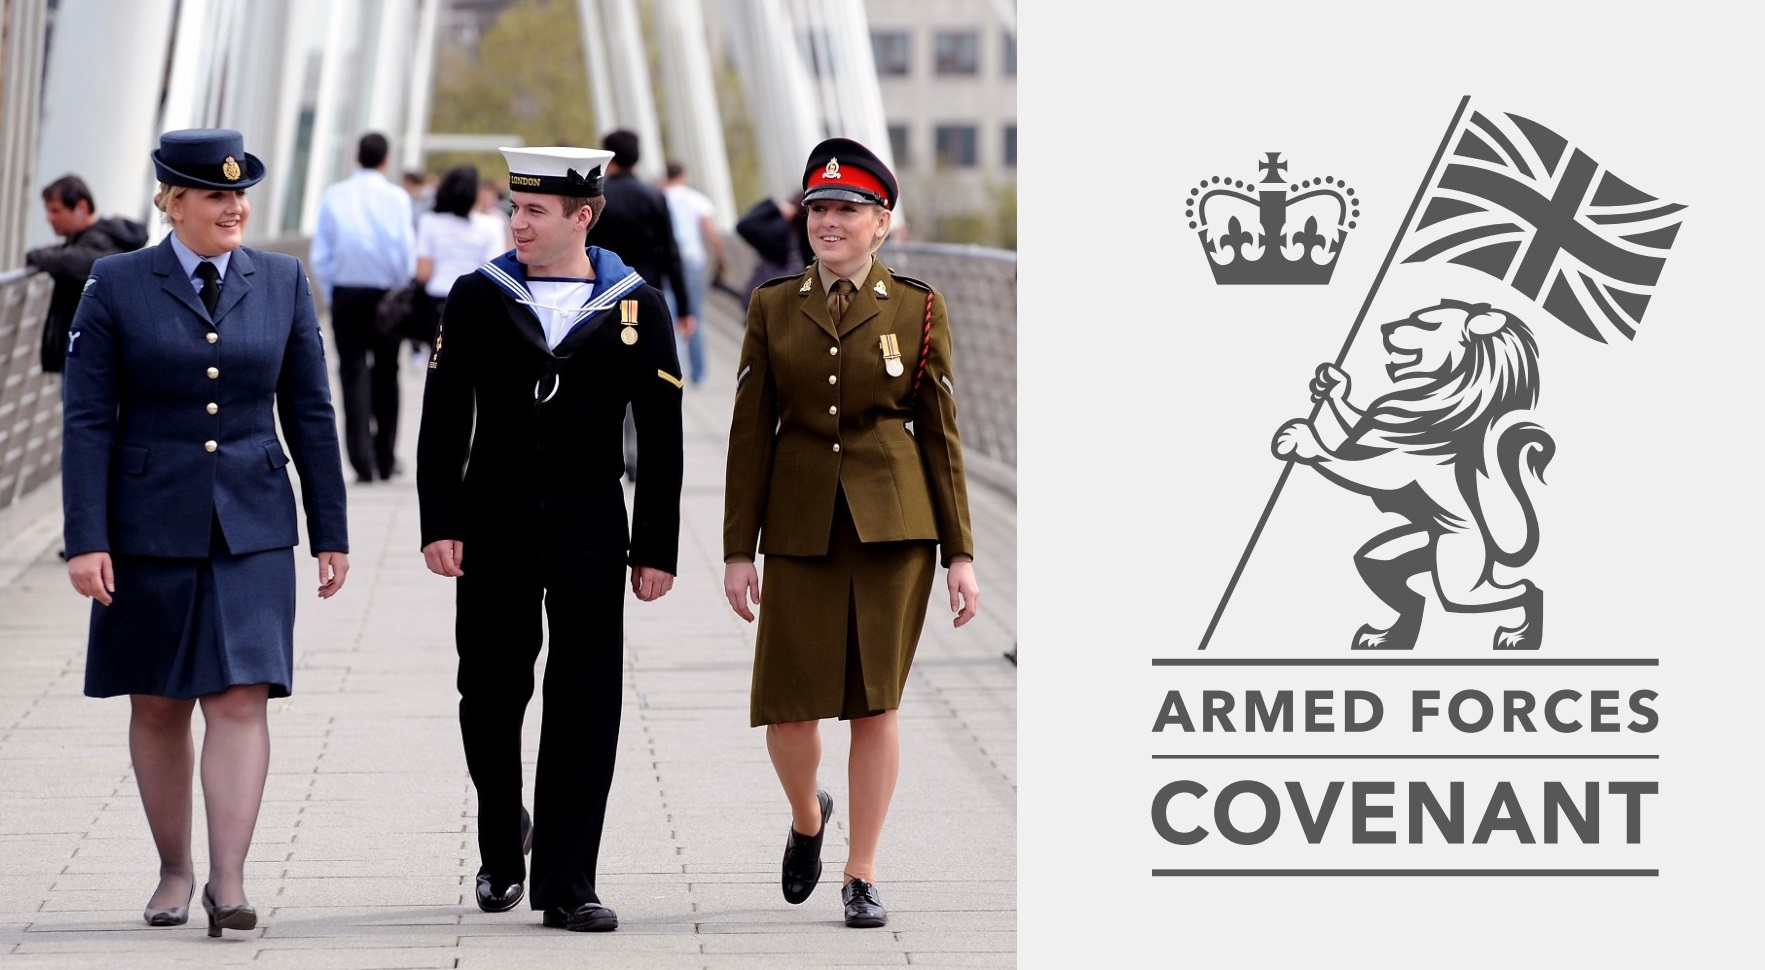 Forces personnel walking across bridge and the Armed Forces Covenant logo